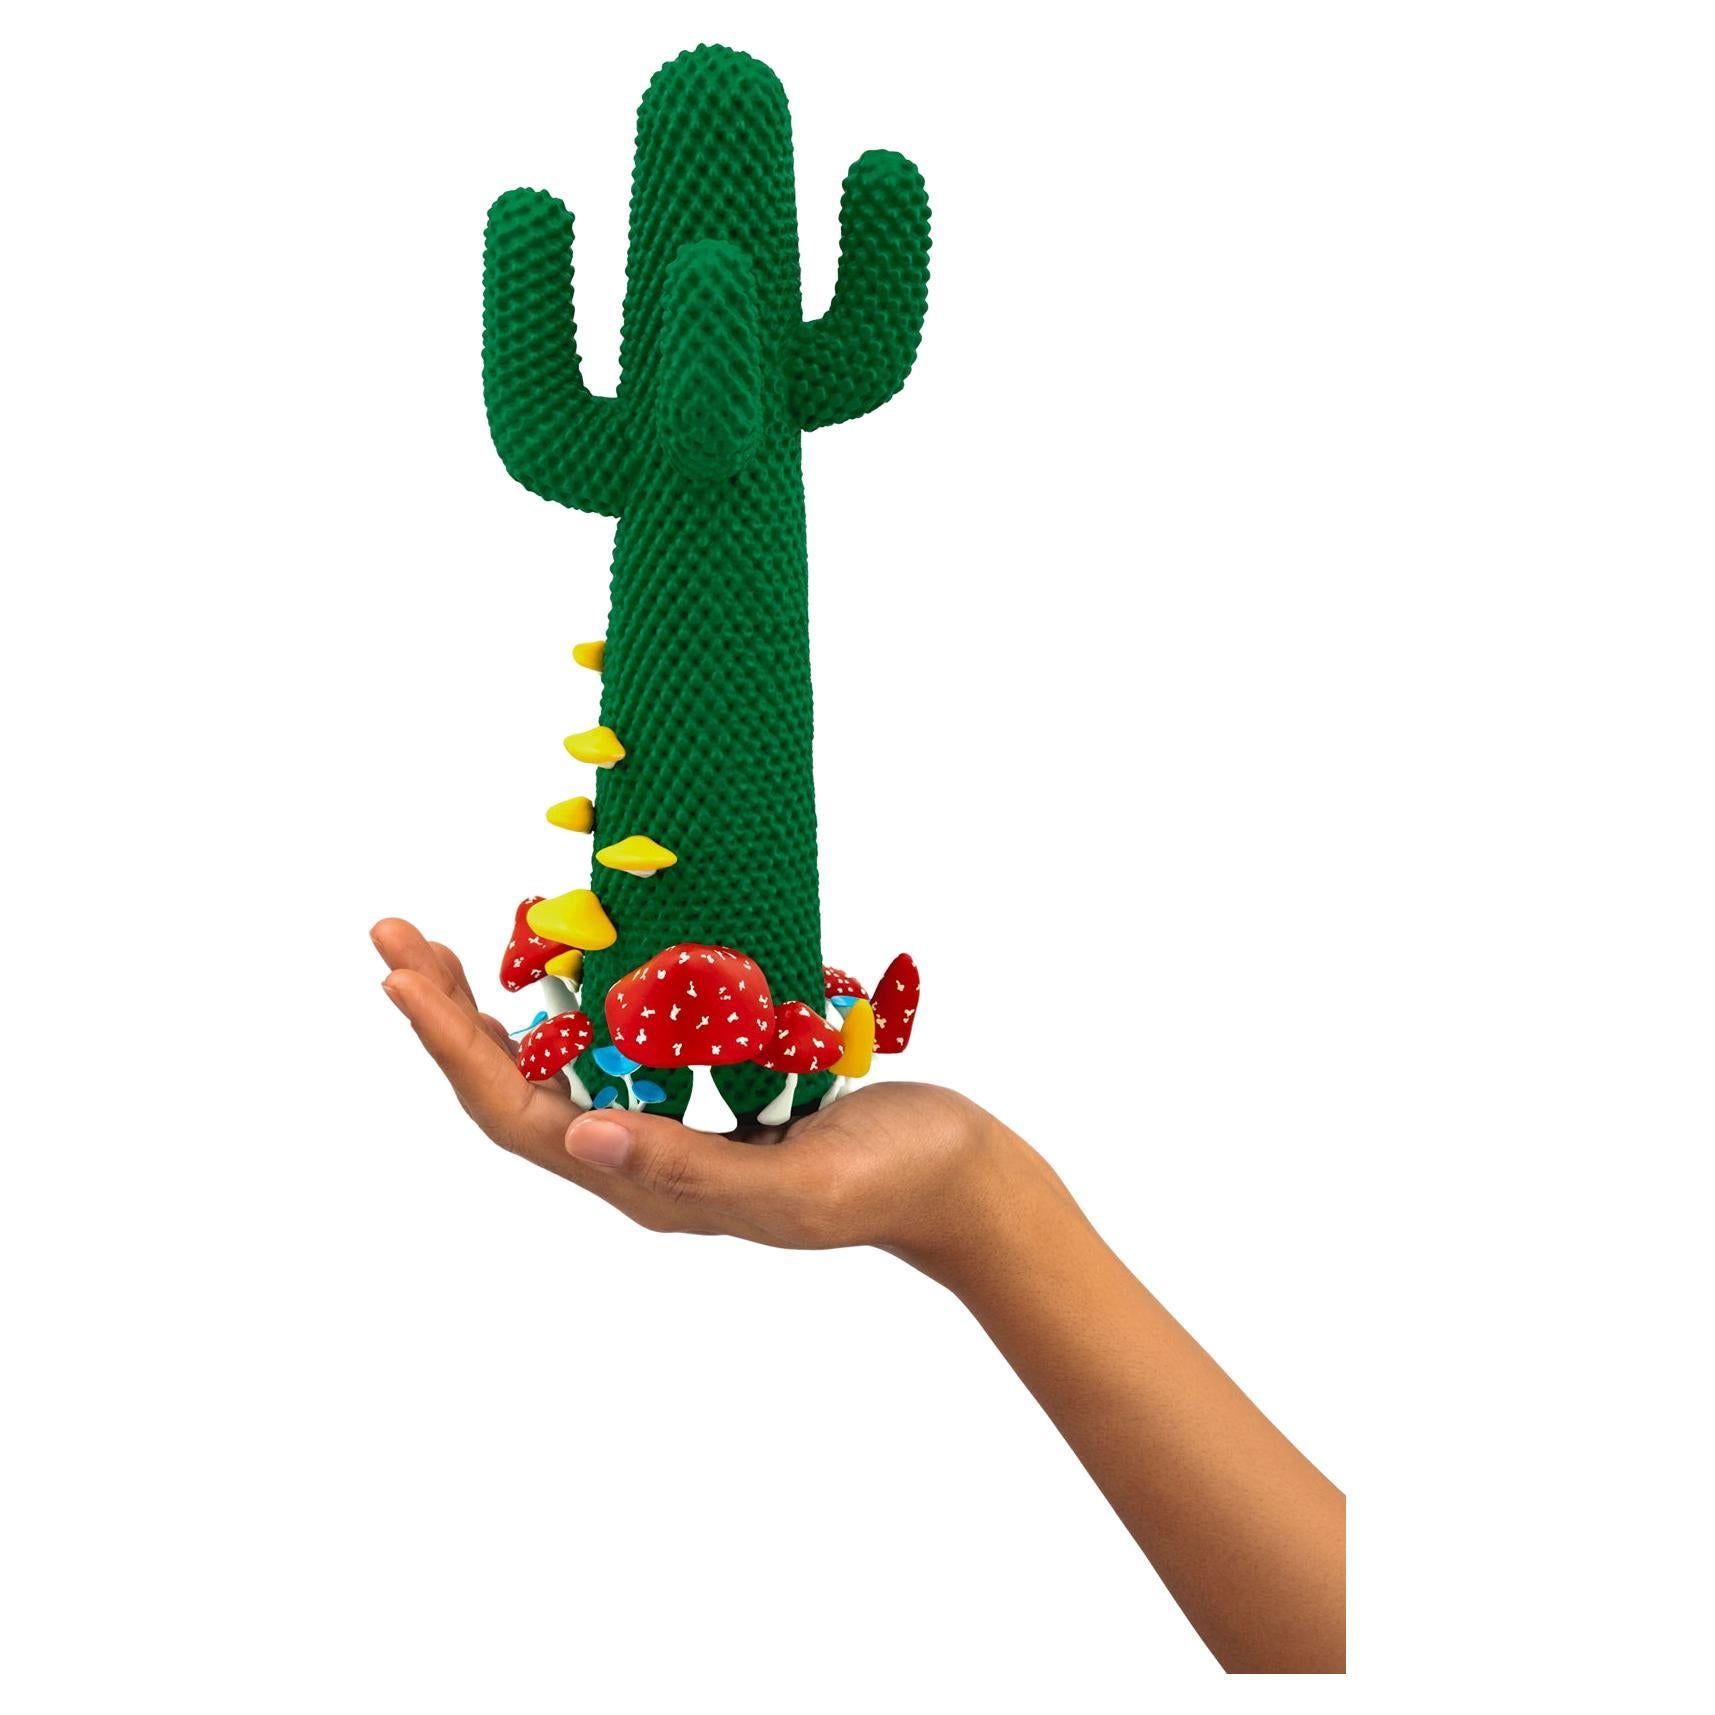 Limited edition #20/99

Gufram presents the miniaturised version of the Shroom CACTUS® created in collaboration with A$AP Rocky and the artist’s new design studio HOMMEMADE Exactly as the real-size Shroom CACTUS®, the new Guframini piece features